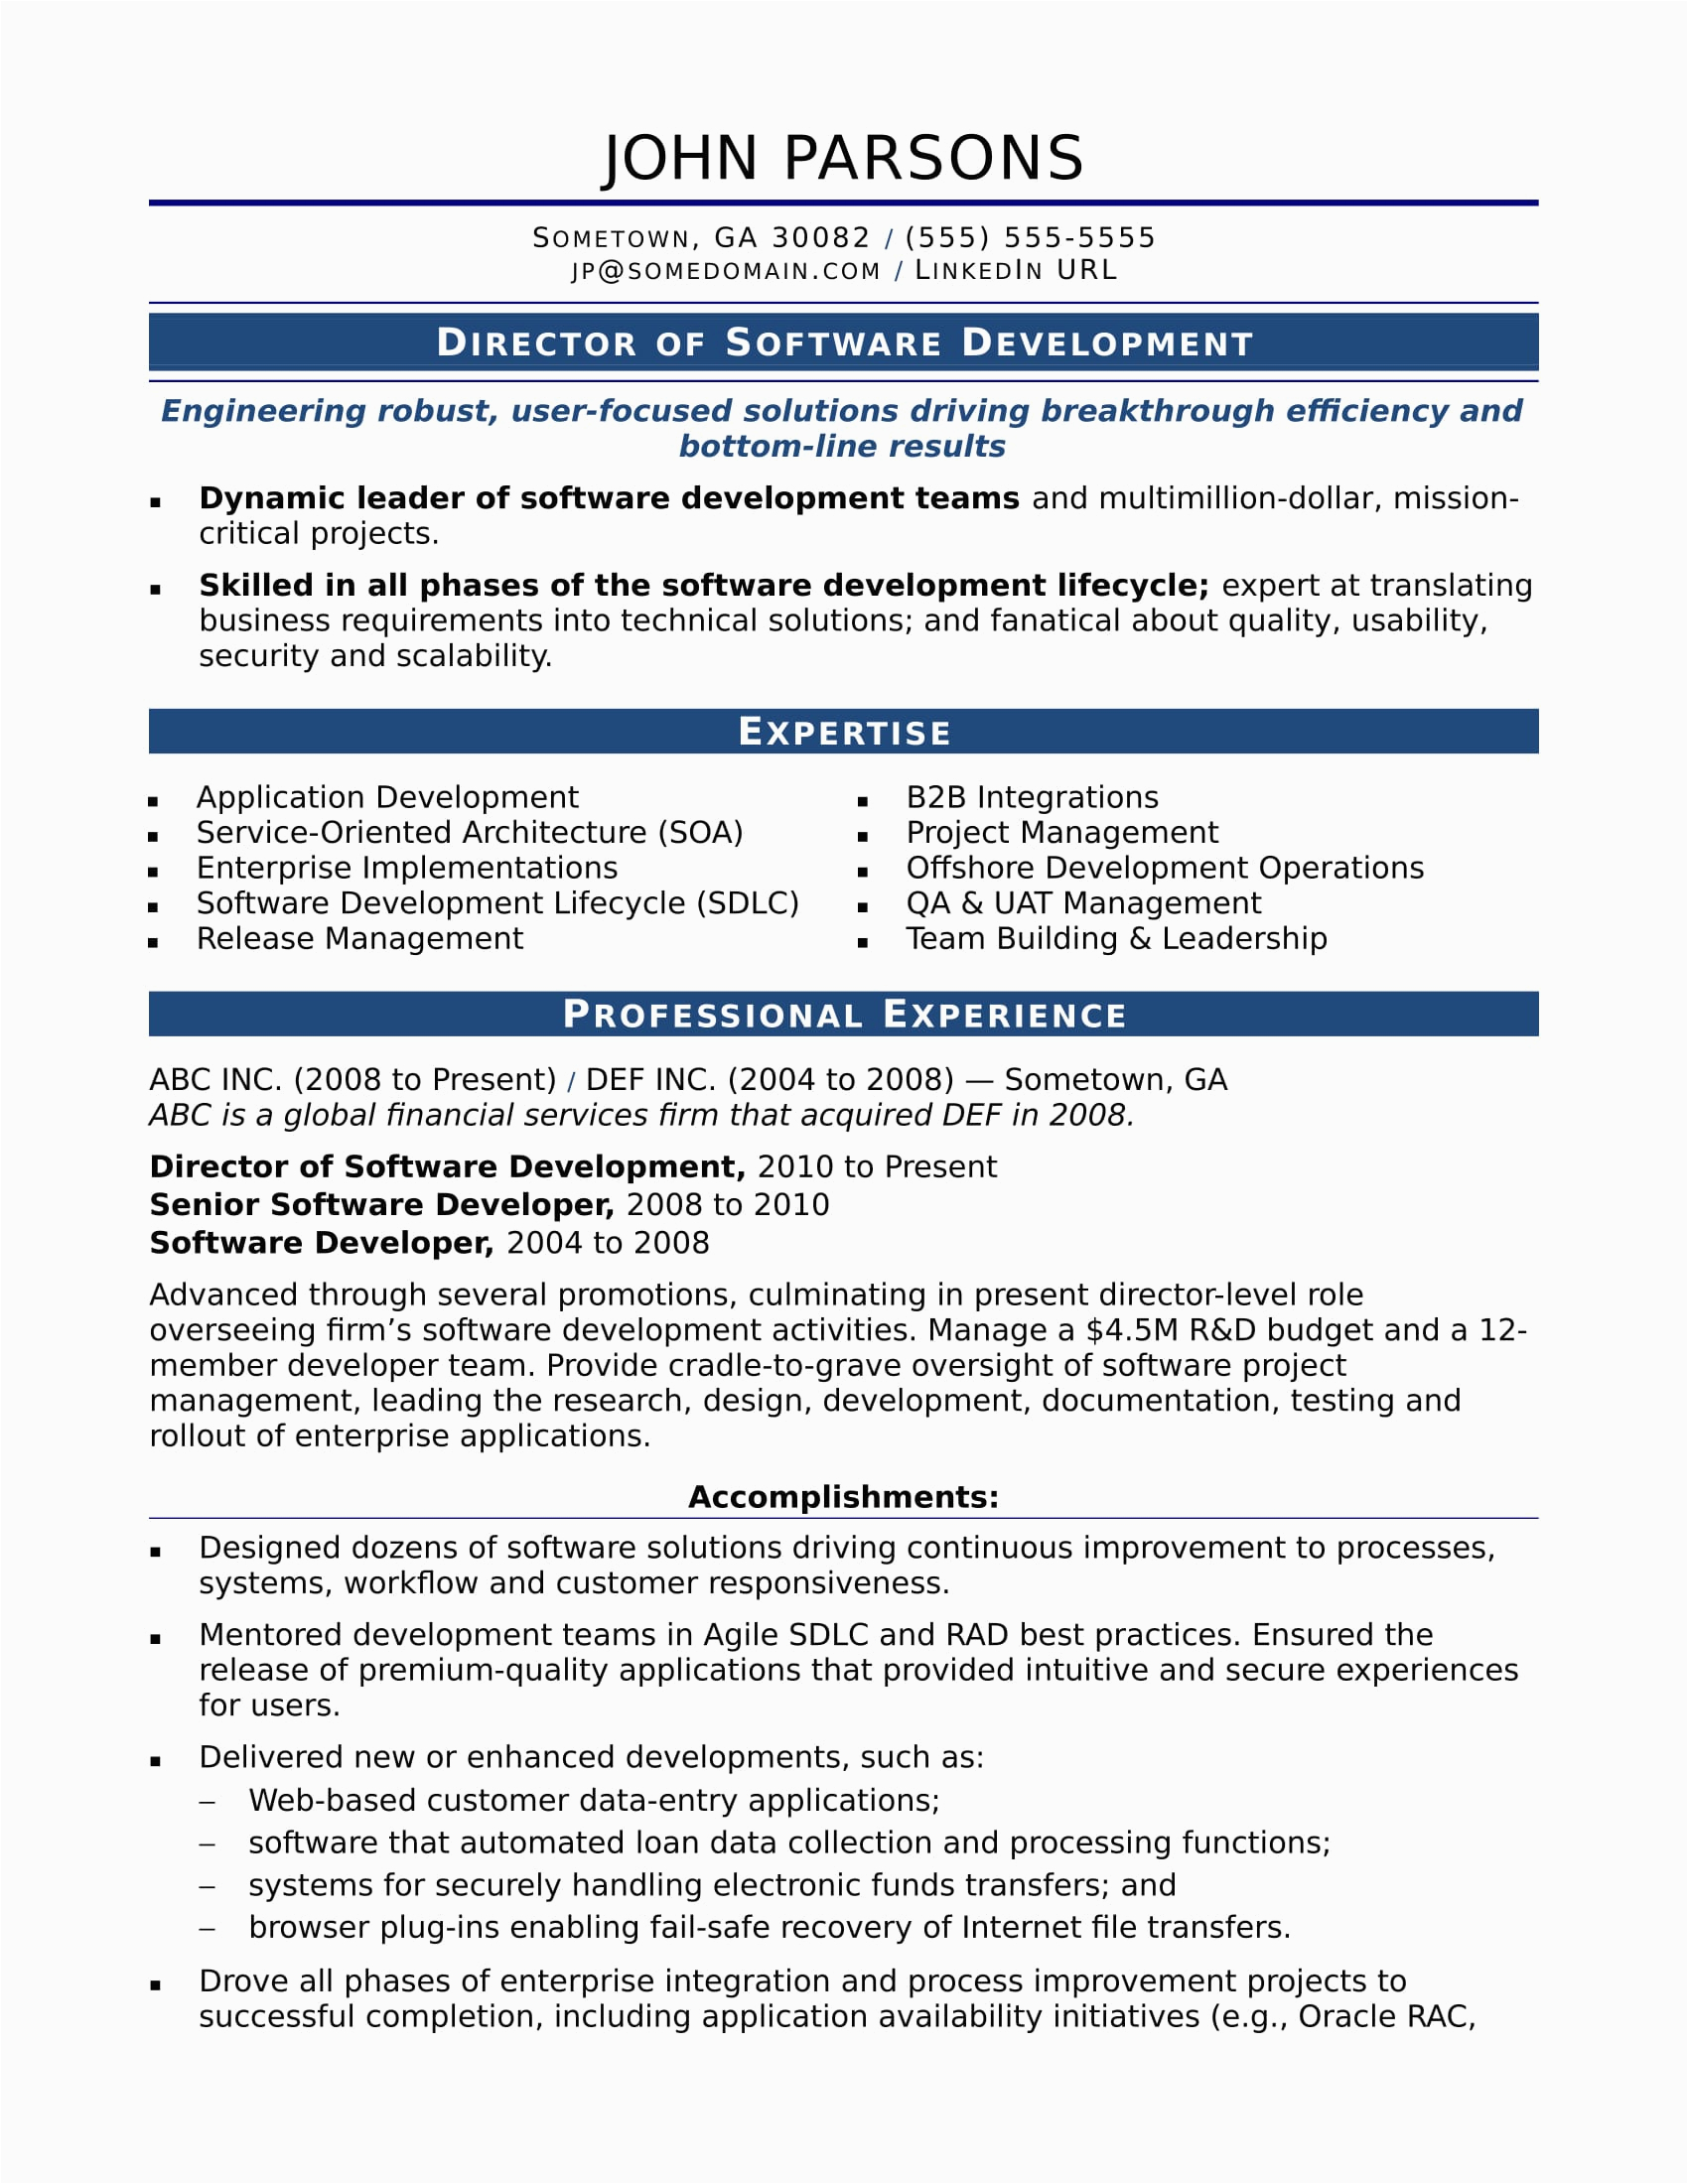 Sample Resume for Experienced Insurance Professional Sample Resume for An Experienced It Developer